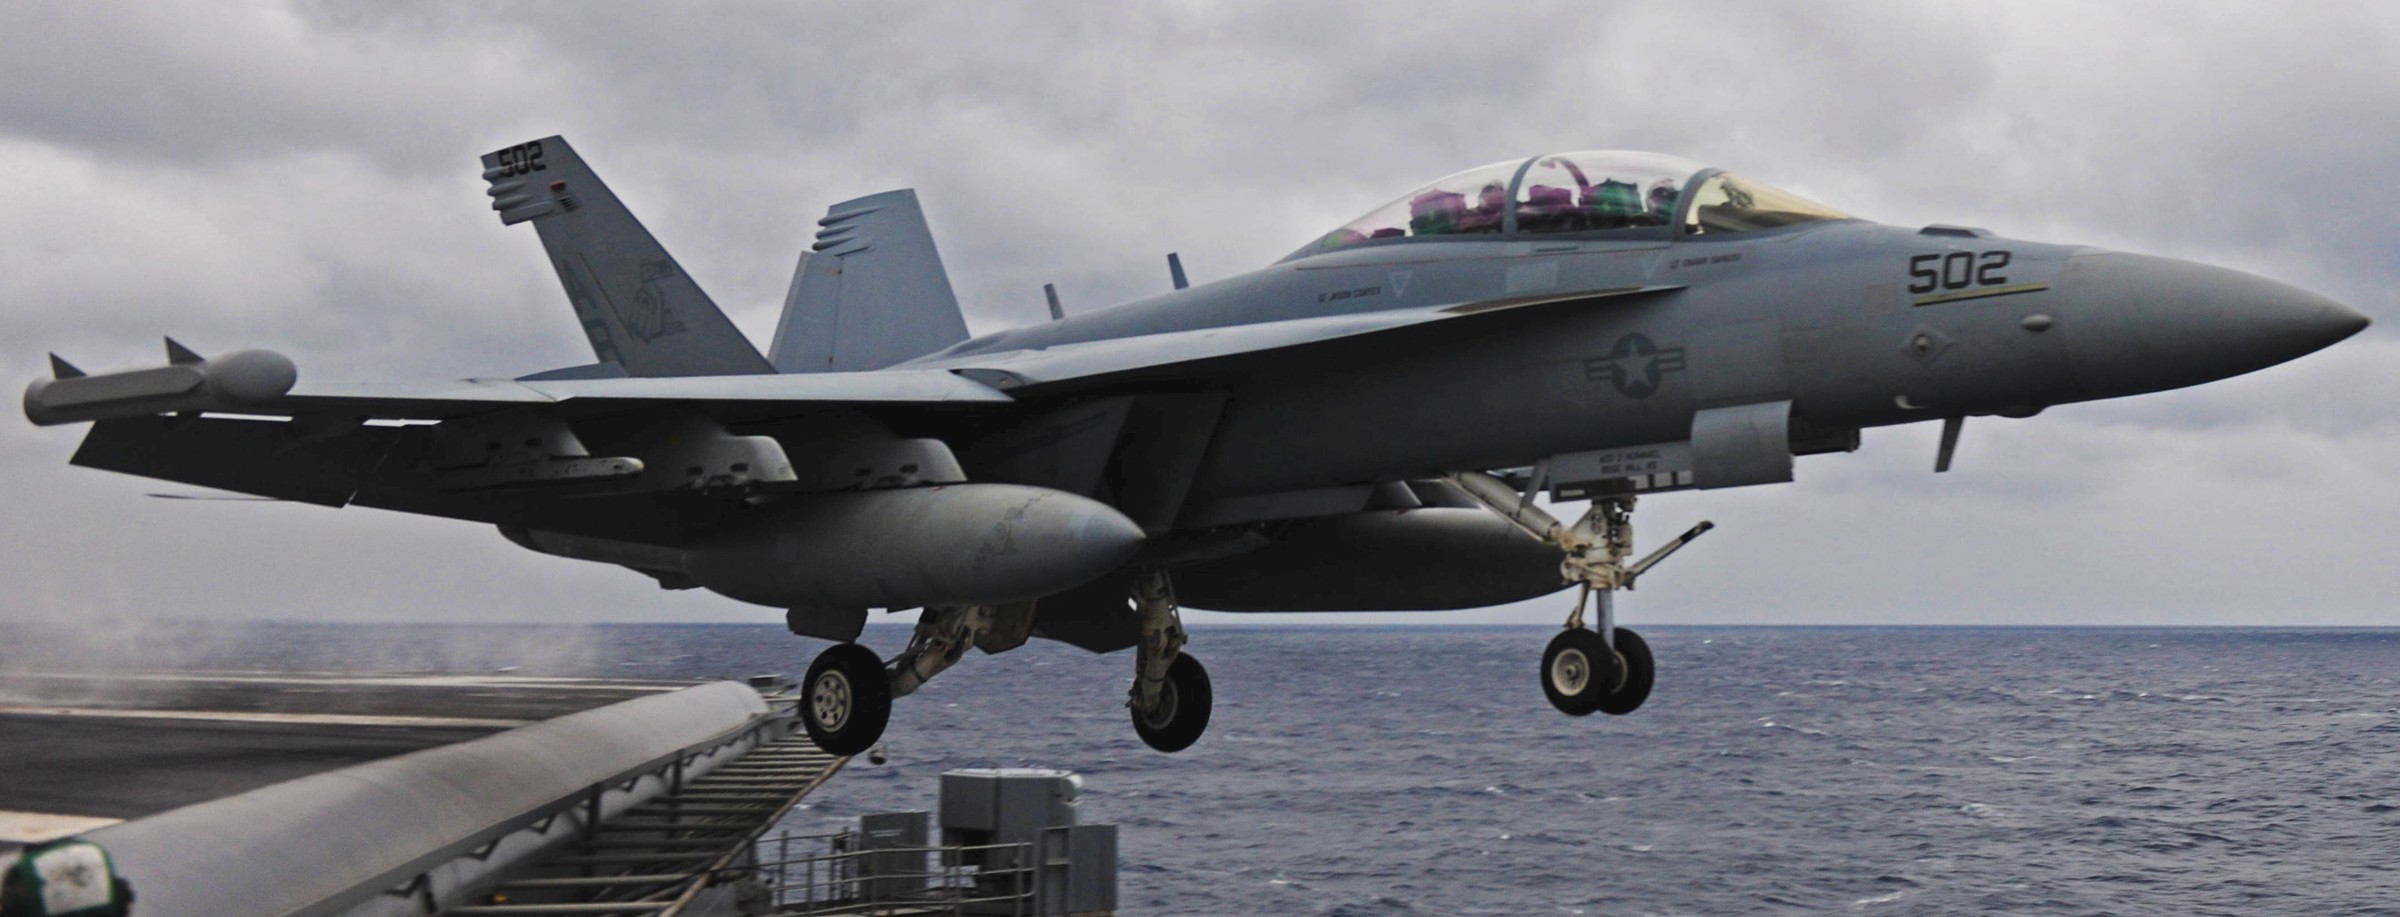 vaq-137 rooks electronic attack squadron us navy ea-18g growler carrier air wing cvw-1 uss theodore roosevelt cvn-71 44